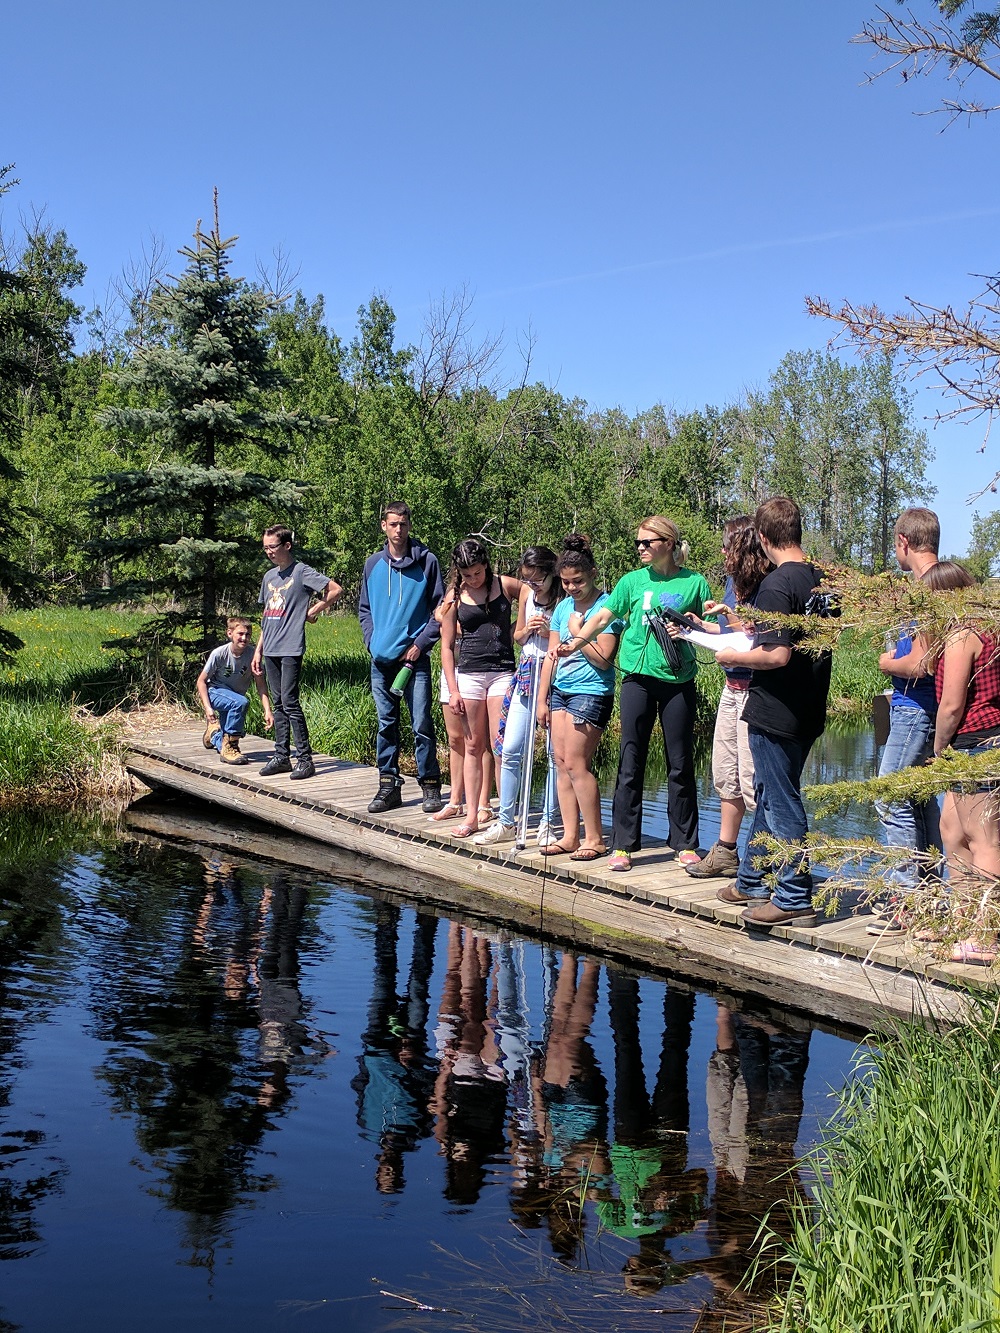 High school students at a pond